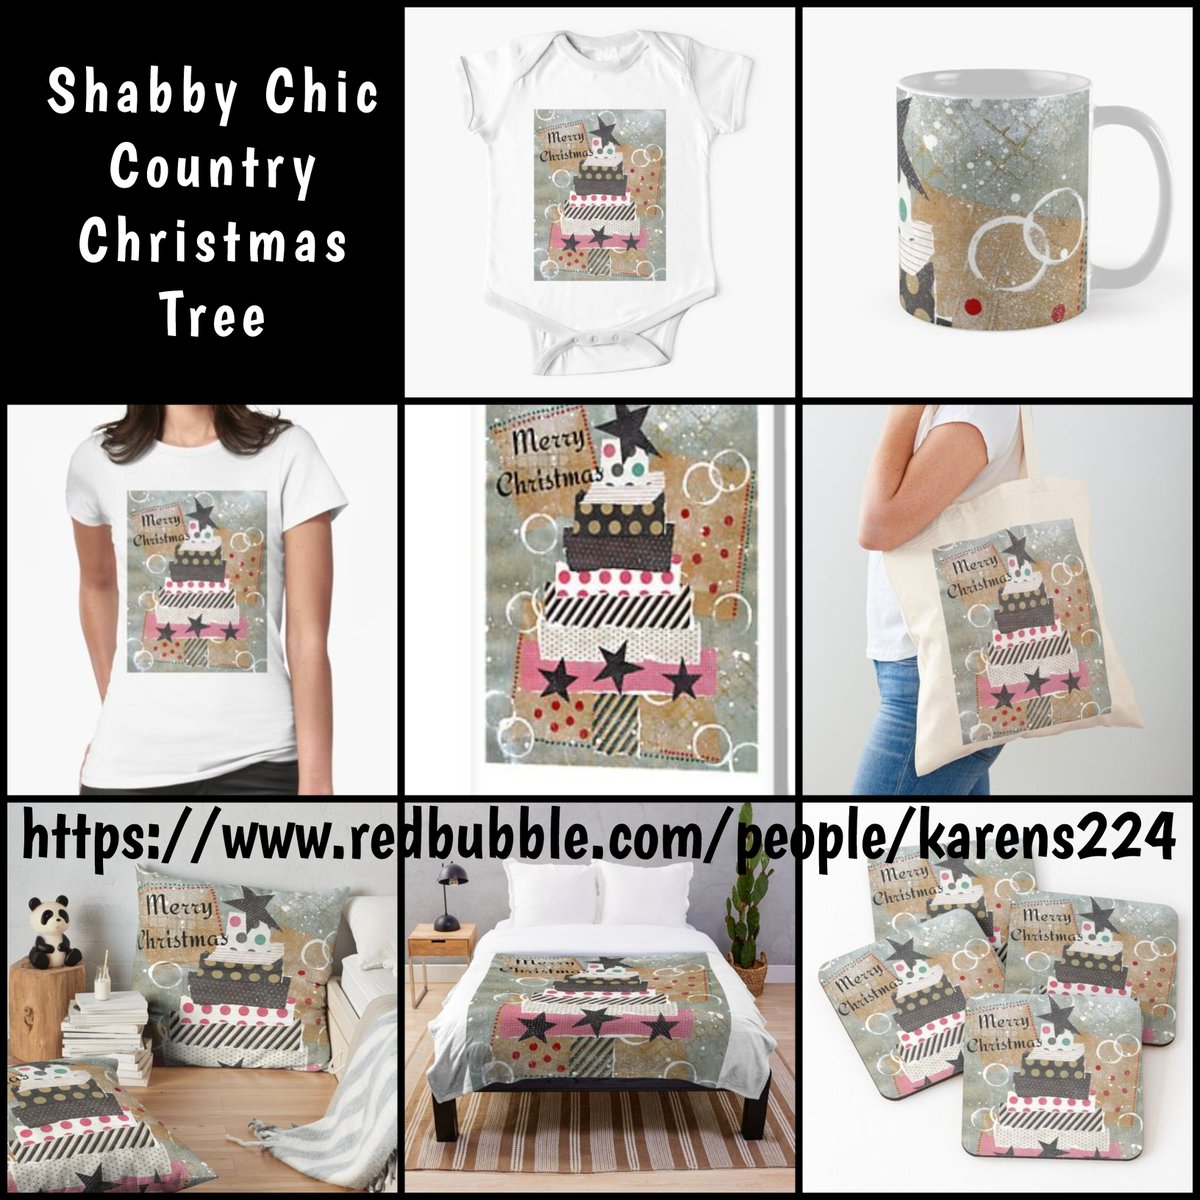 Shabby Chic Country Christmas Tree
Apparel, Home Decor, Bags, Mugs, Cards & MORE!
Click my link to shop!
redbubble.com/people/karens2…
#shabbychicchristmas #countrychristmas #apparel #homedecor #xmas #merrychristmas #giftideas